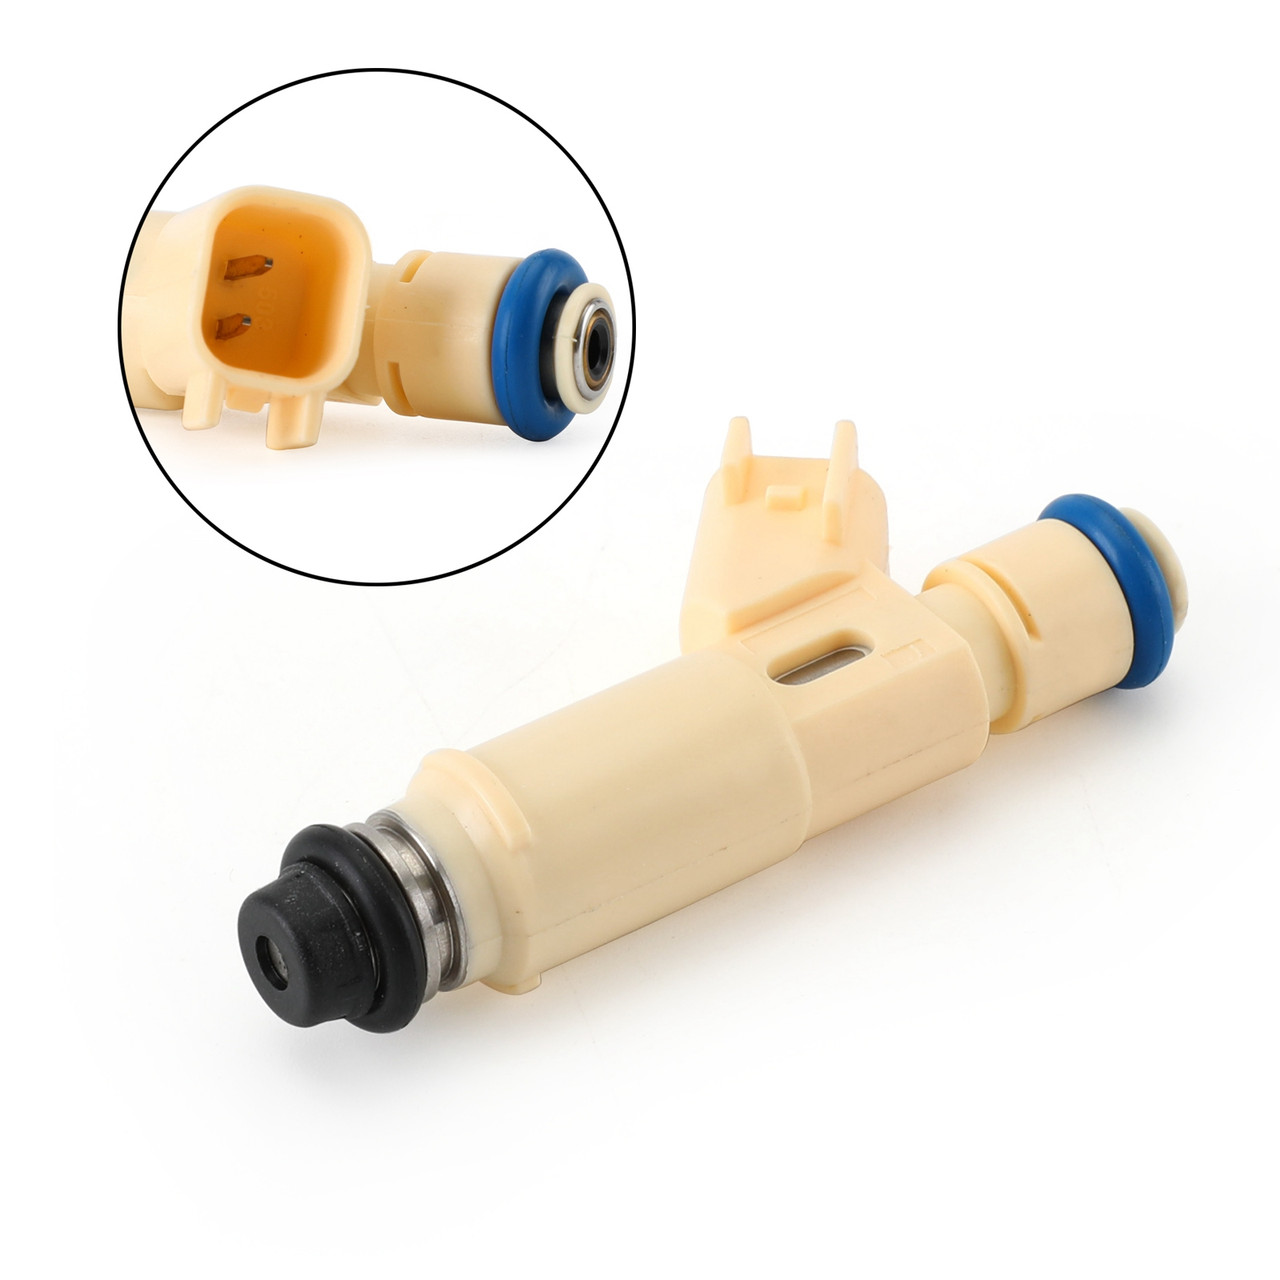 1pcs Fuel Injectors YL8E-C7B Fit for Mazda Tribute 01-04 Ford Escape 01-03 Taurus Mercury Sable 2001 Yellow